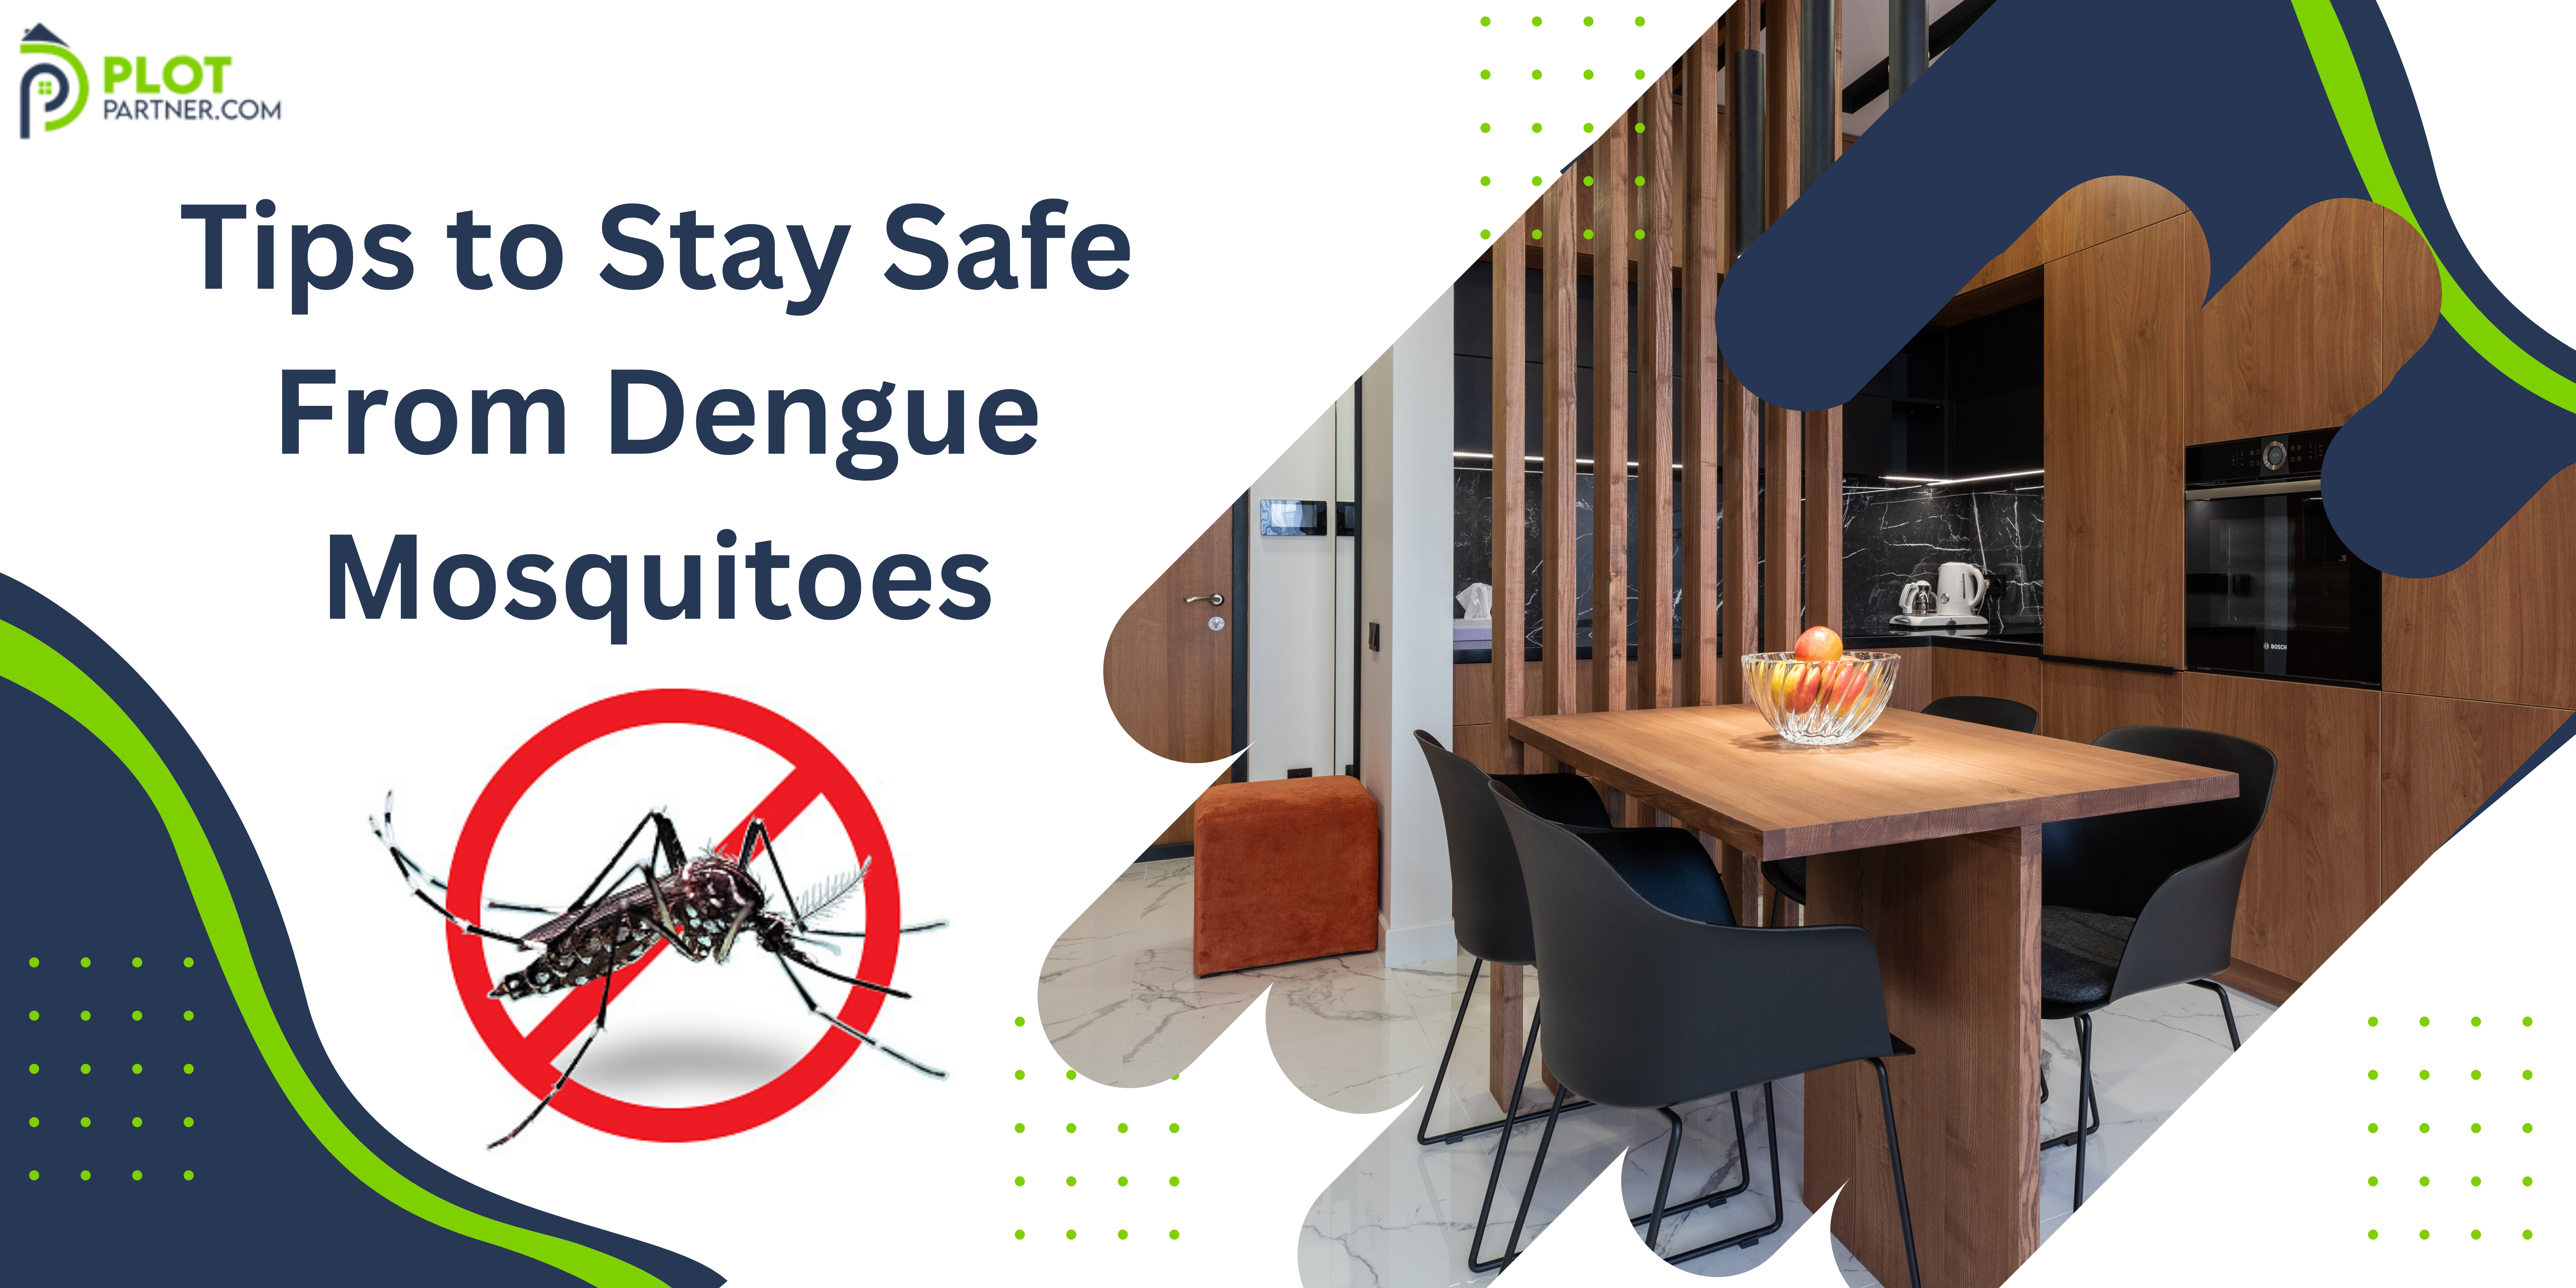 16 Tips to Stay Safe From Dengue Mosquitoes | Plot-Partner